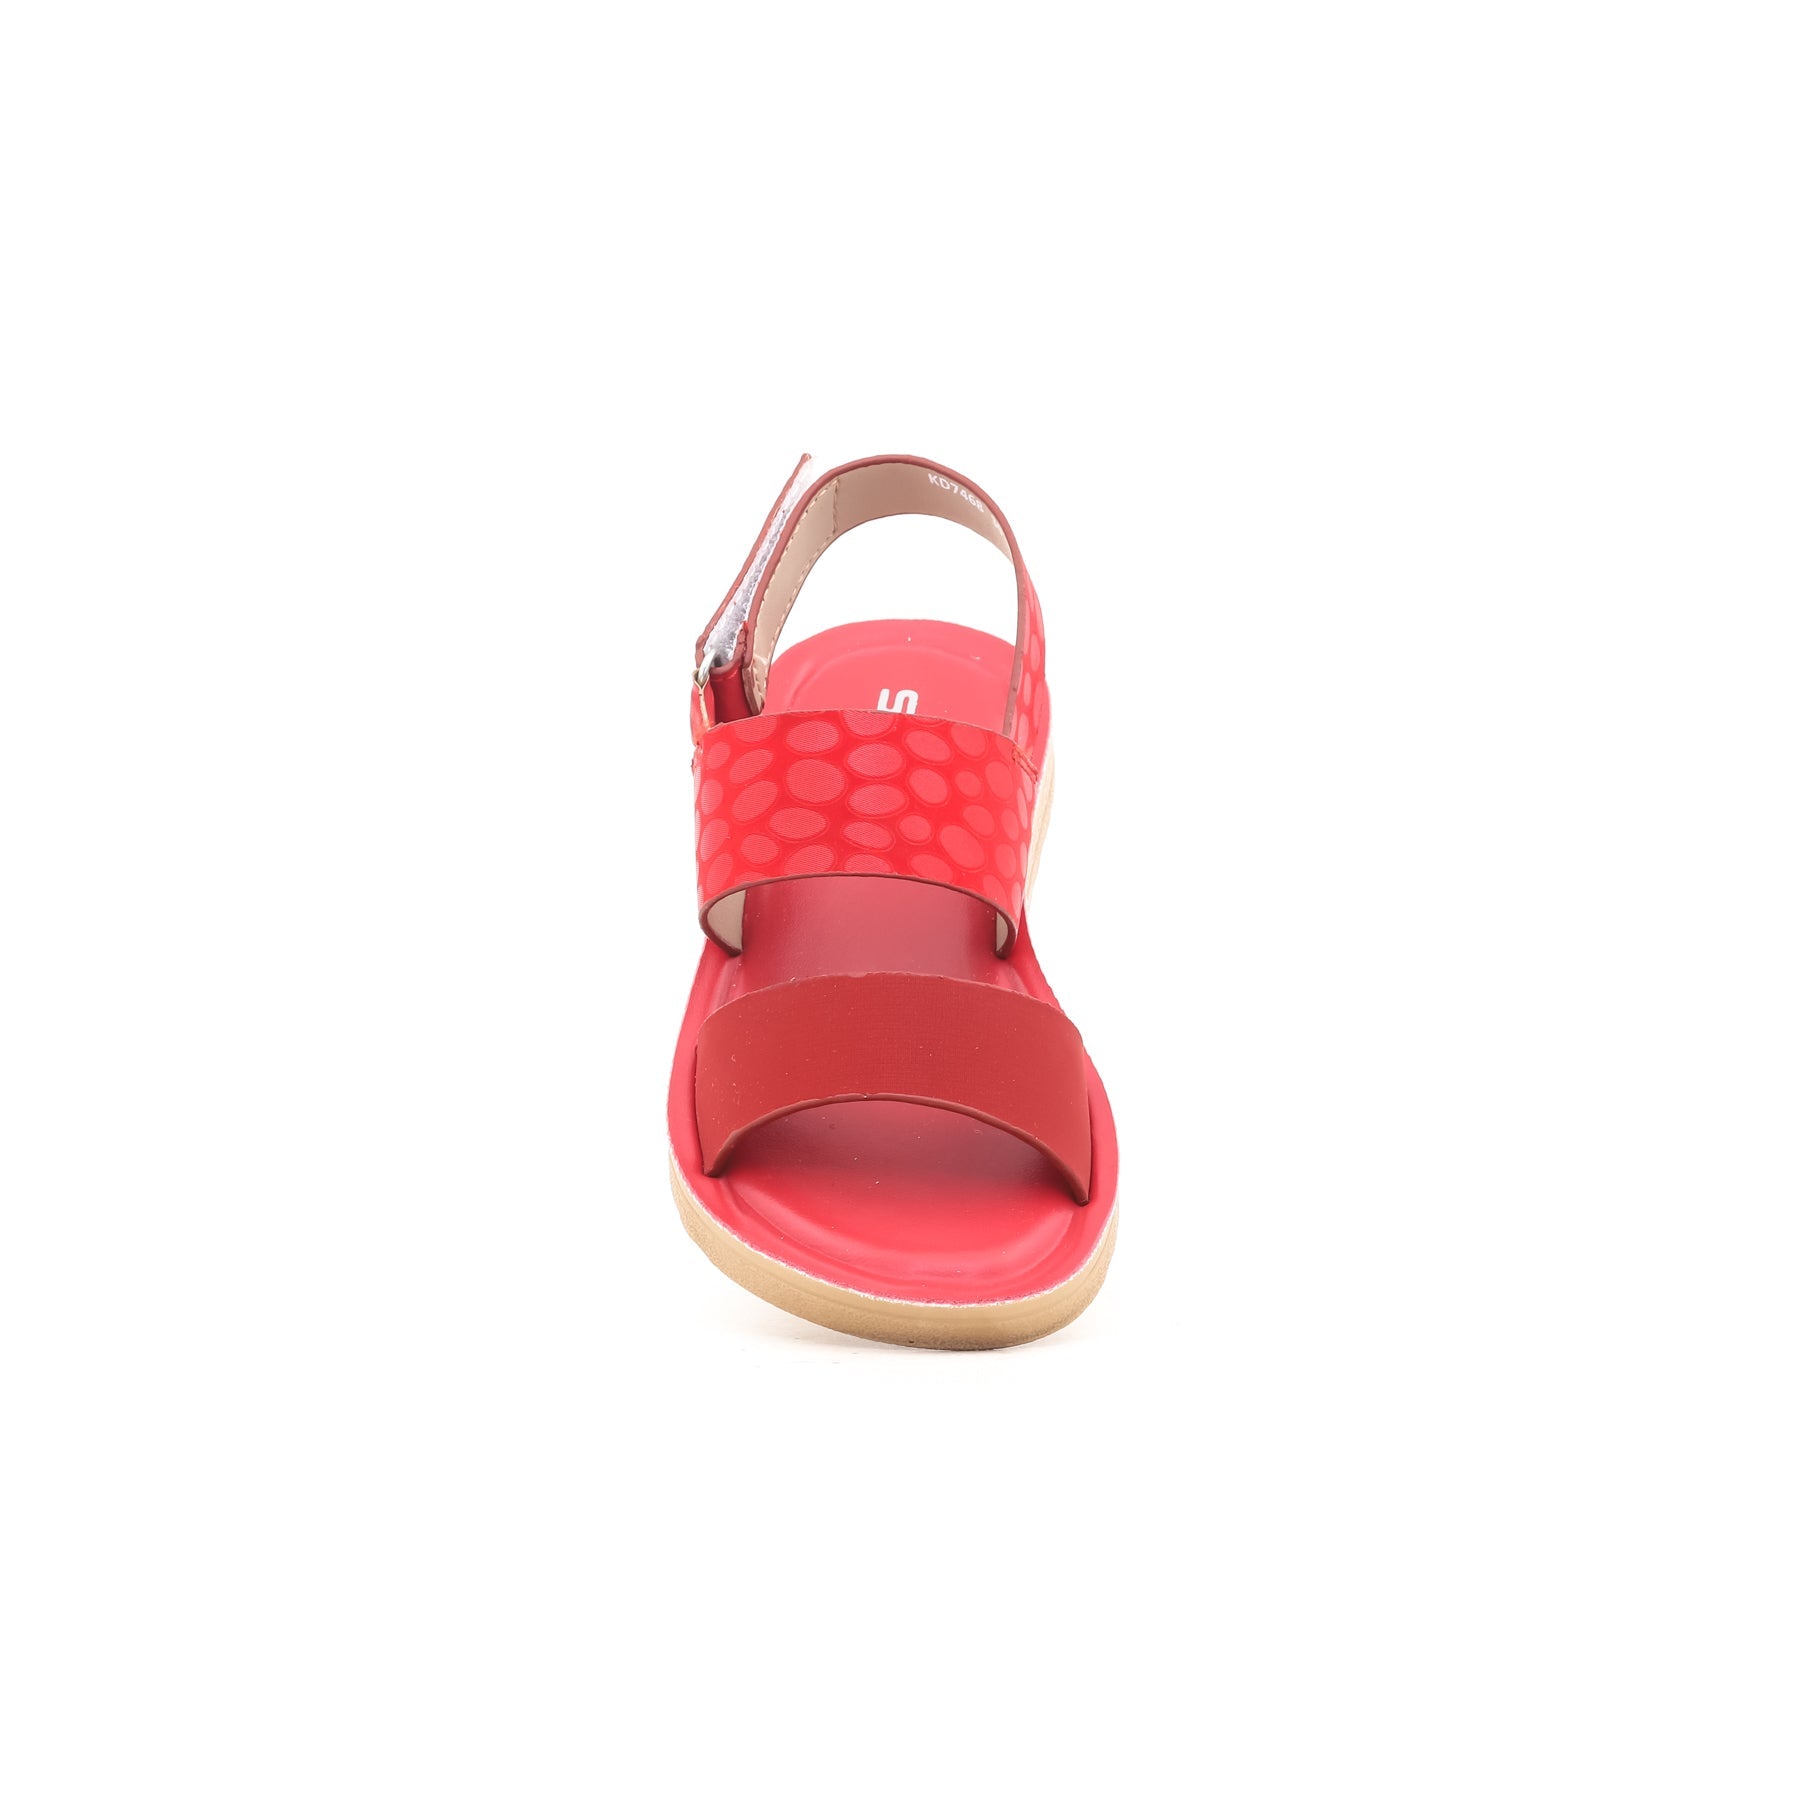 Girls Red Casual Sandal KD7468